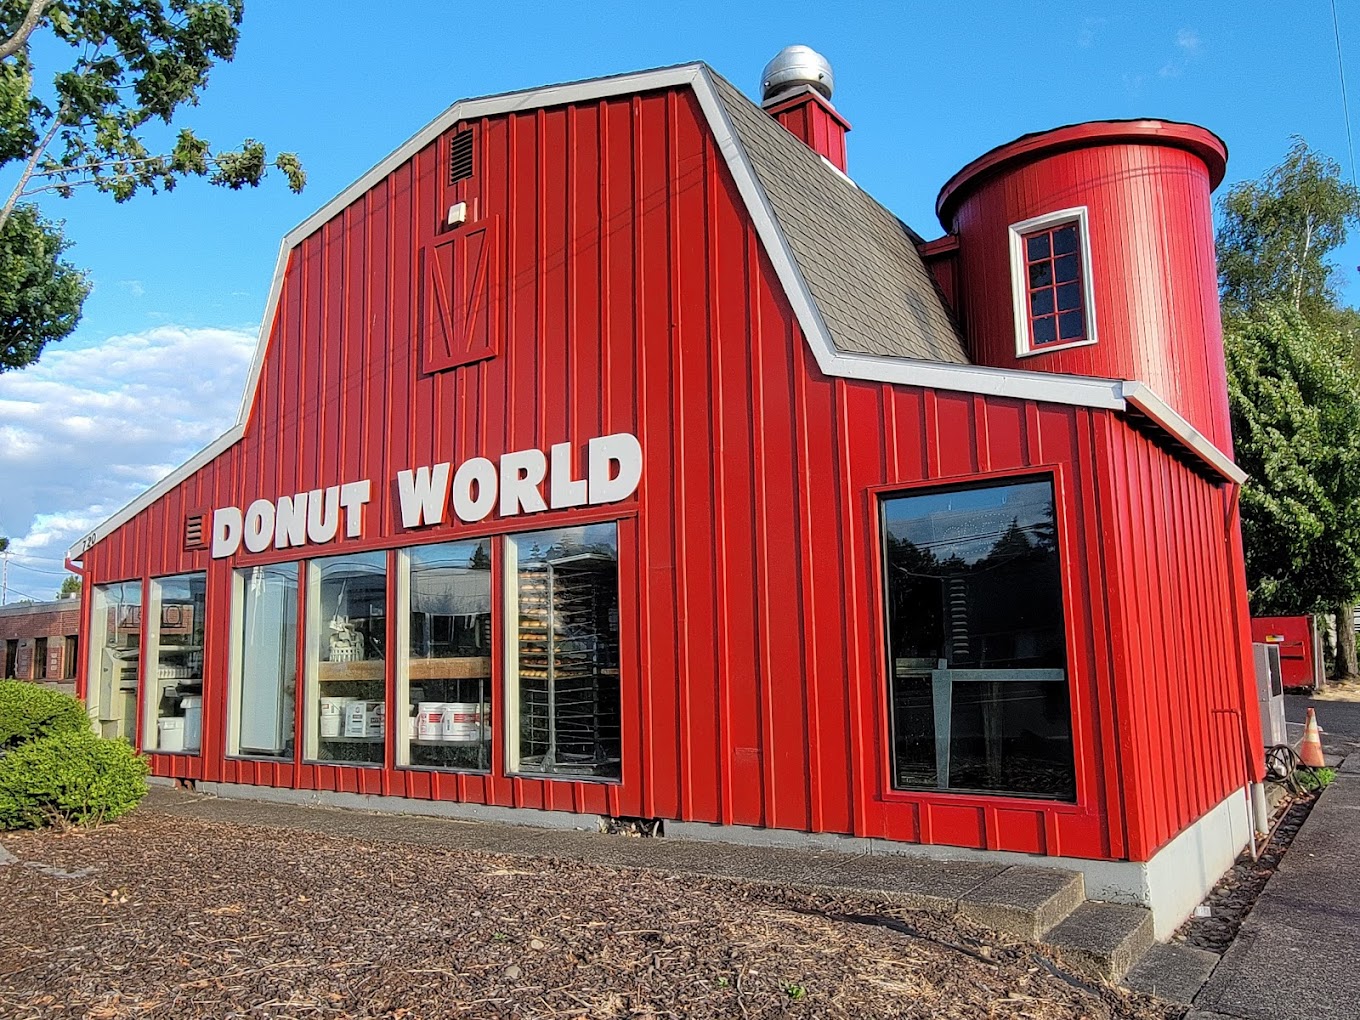 The Oregon Donut Shop That’s Been Serving Up Irresistible Treats Since 1983